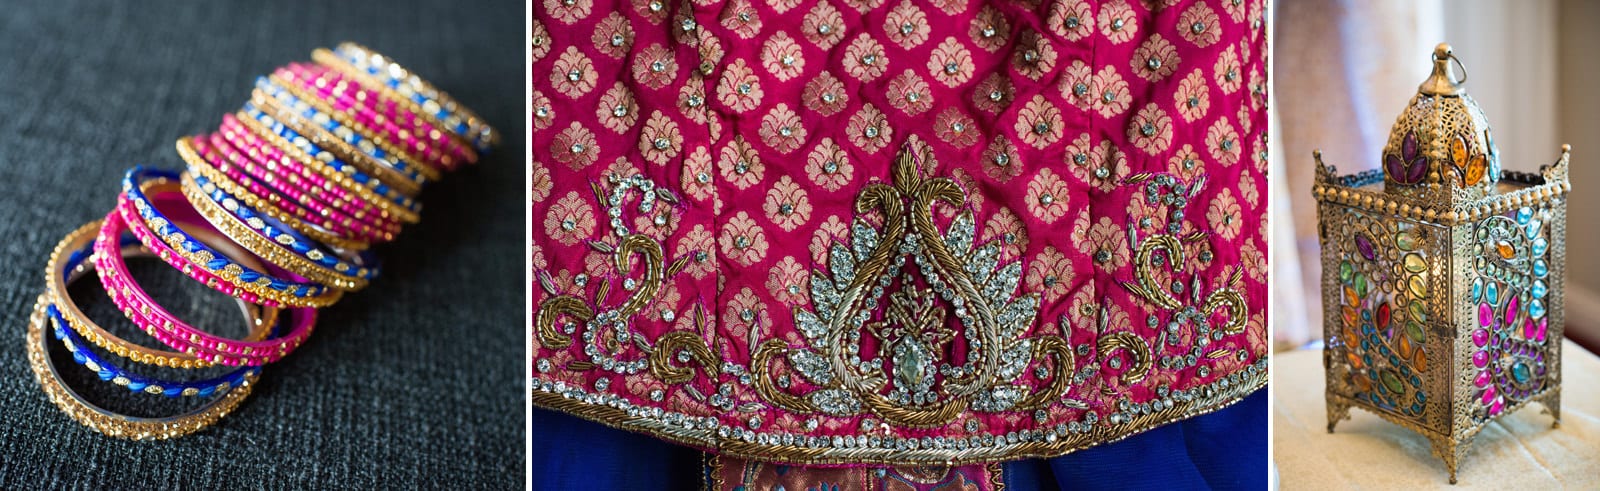 colorful bracelets, detail of the stitching on a sari, and a colorful jeweled lantern at a south asian wedding in Pittsburgh.